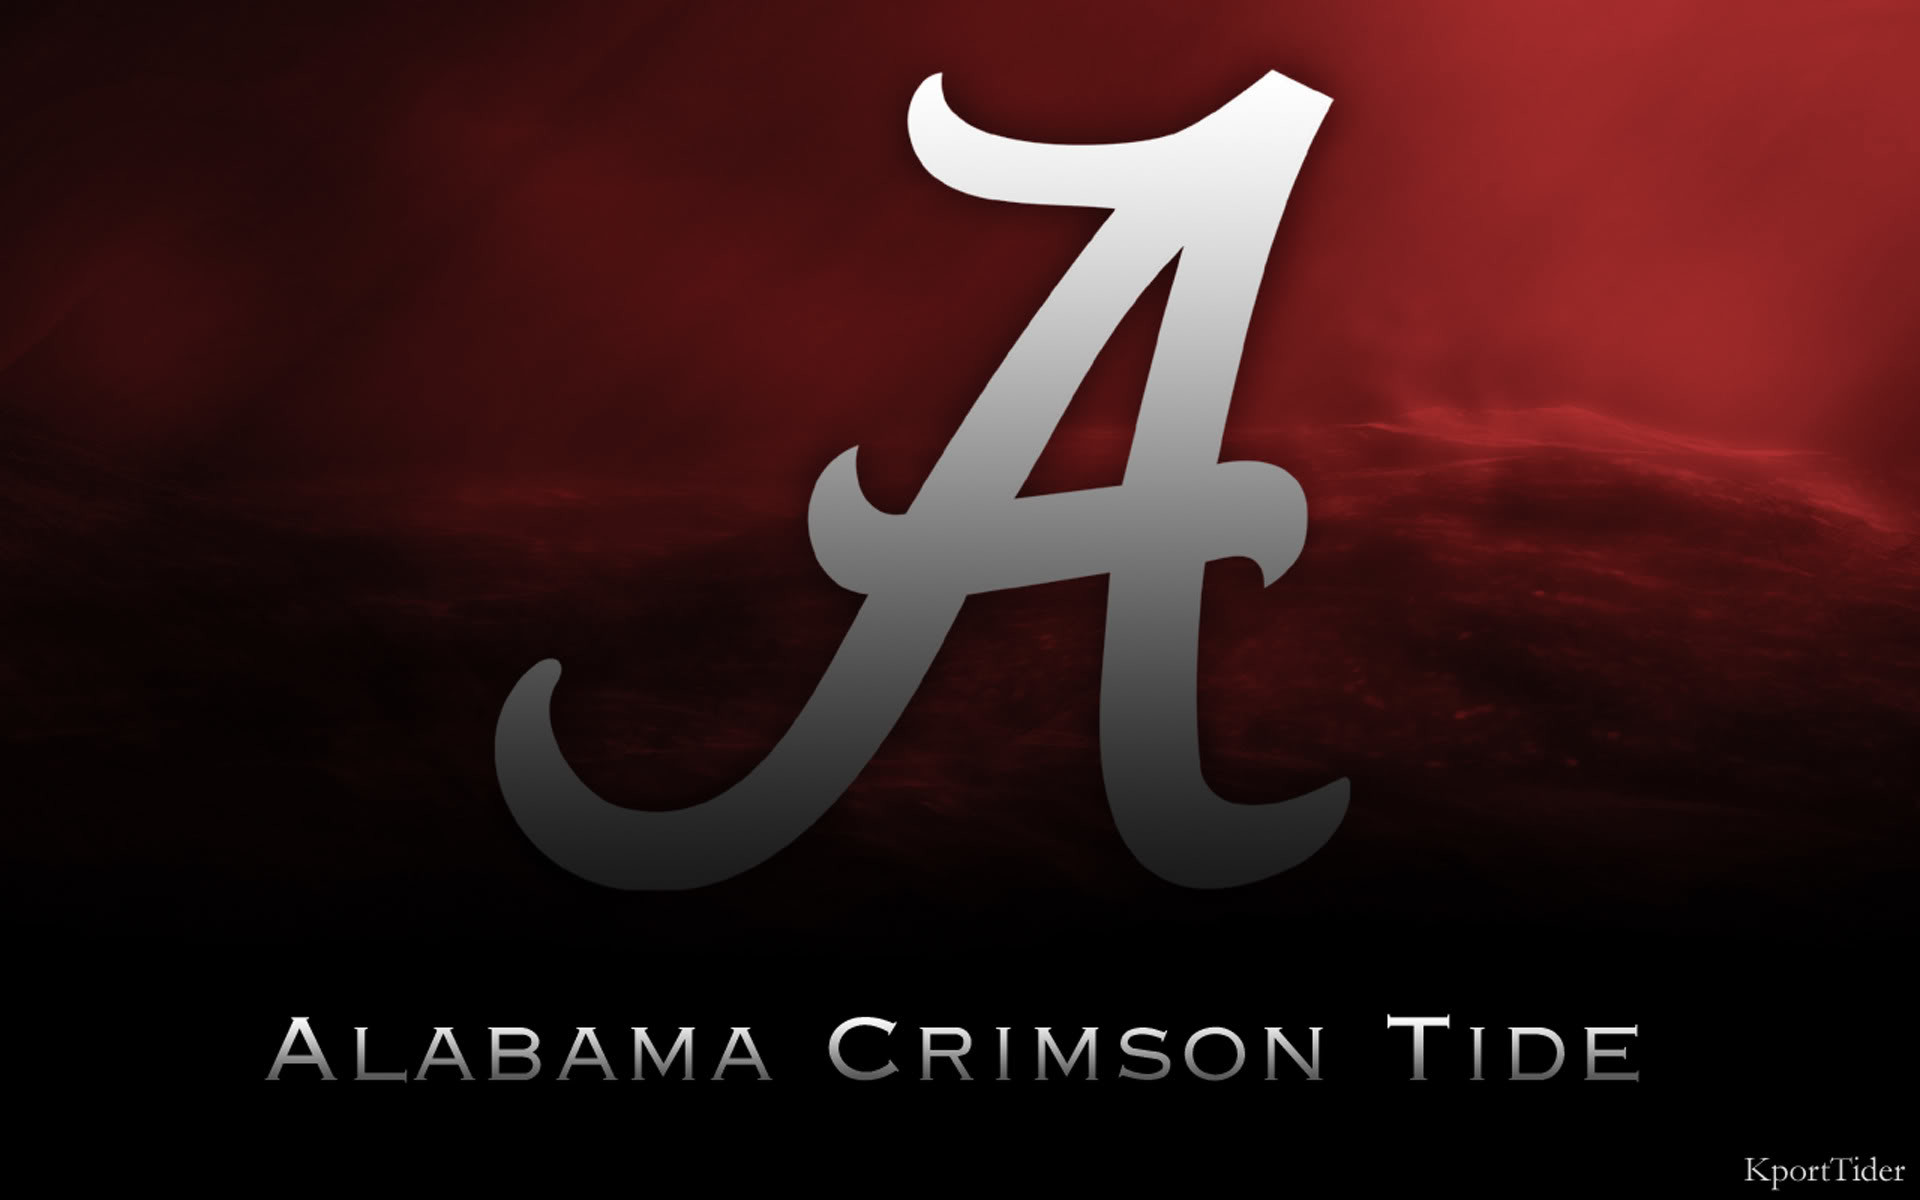 ALABAMA CRIMSON TIDE college football wallpaper background 0 HTML code. Thread Maybe the best Bama Wallpaper Ive ever seen